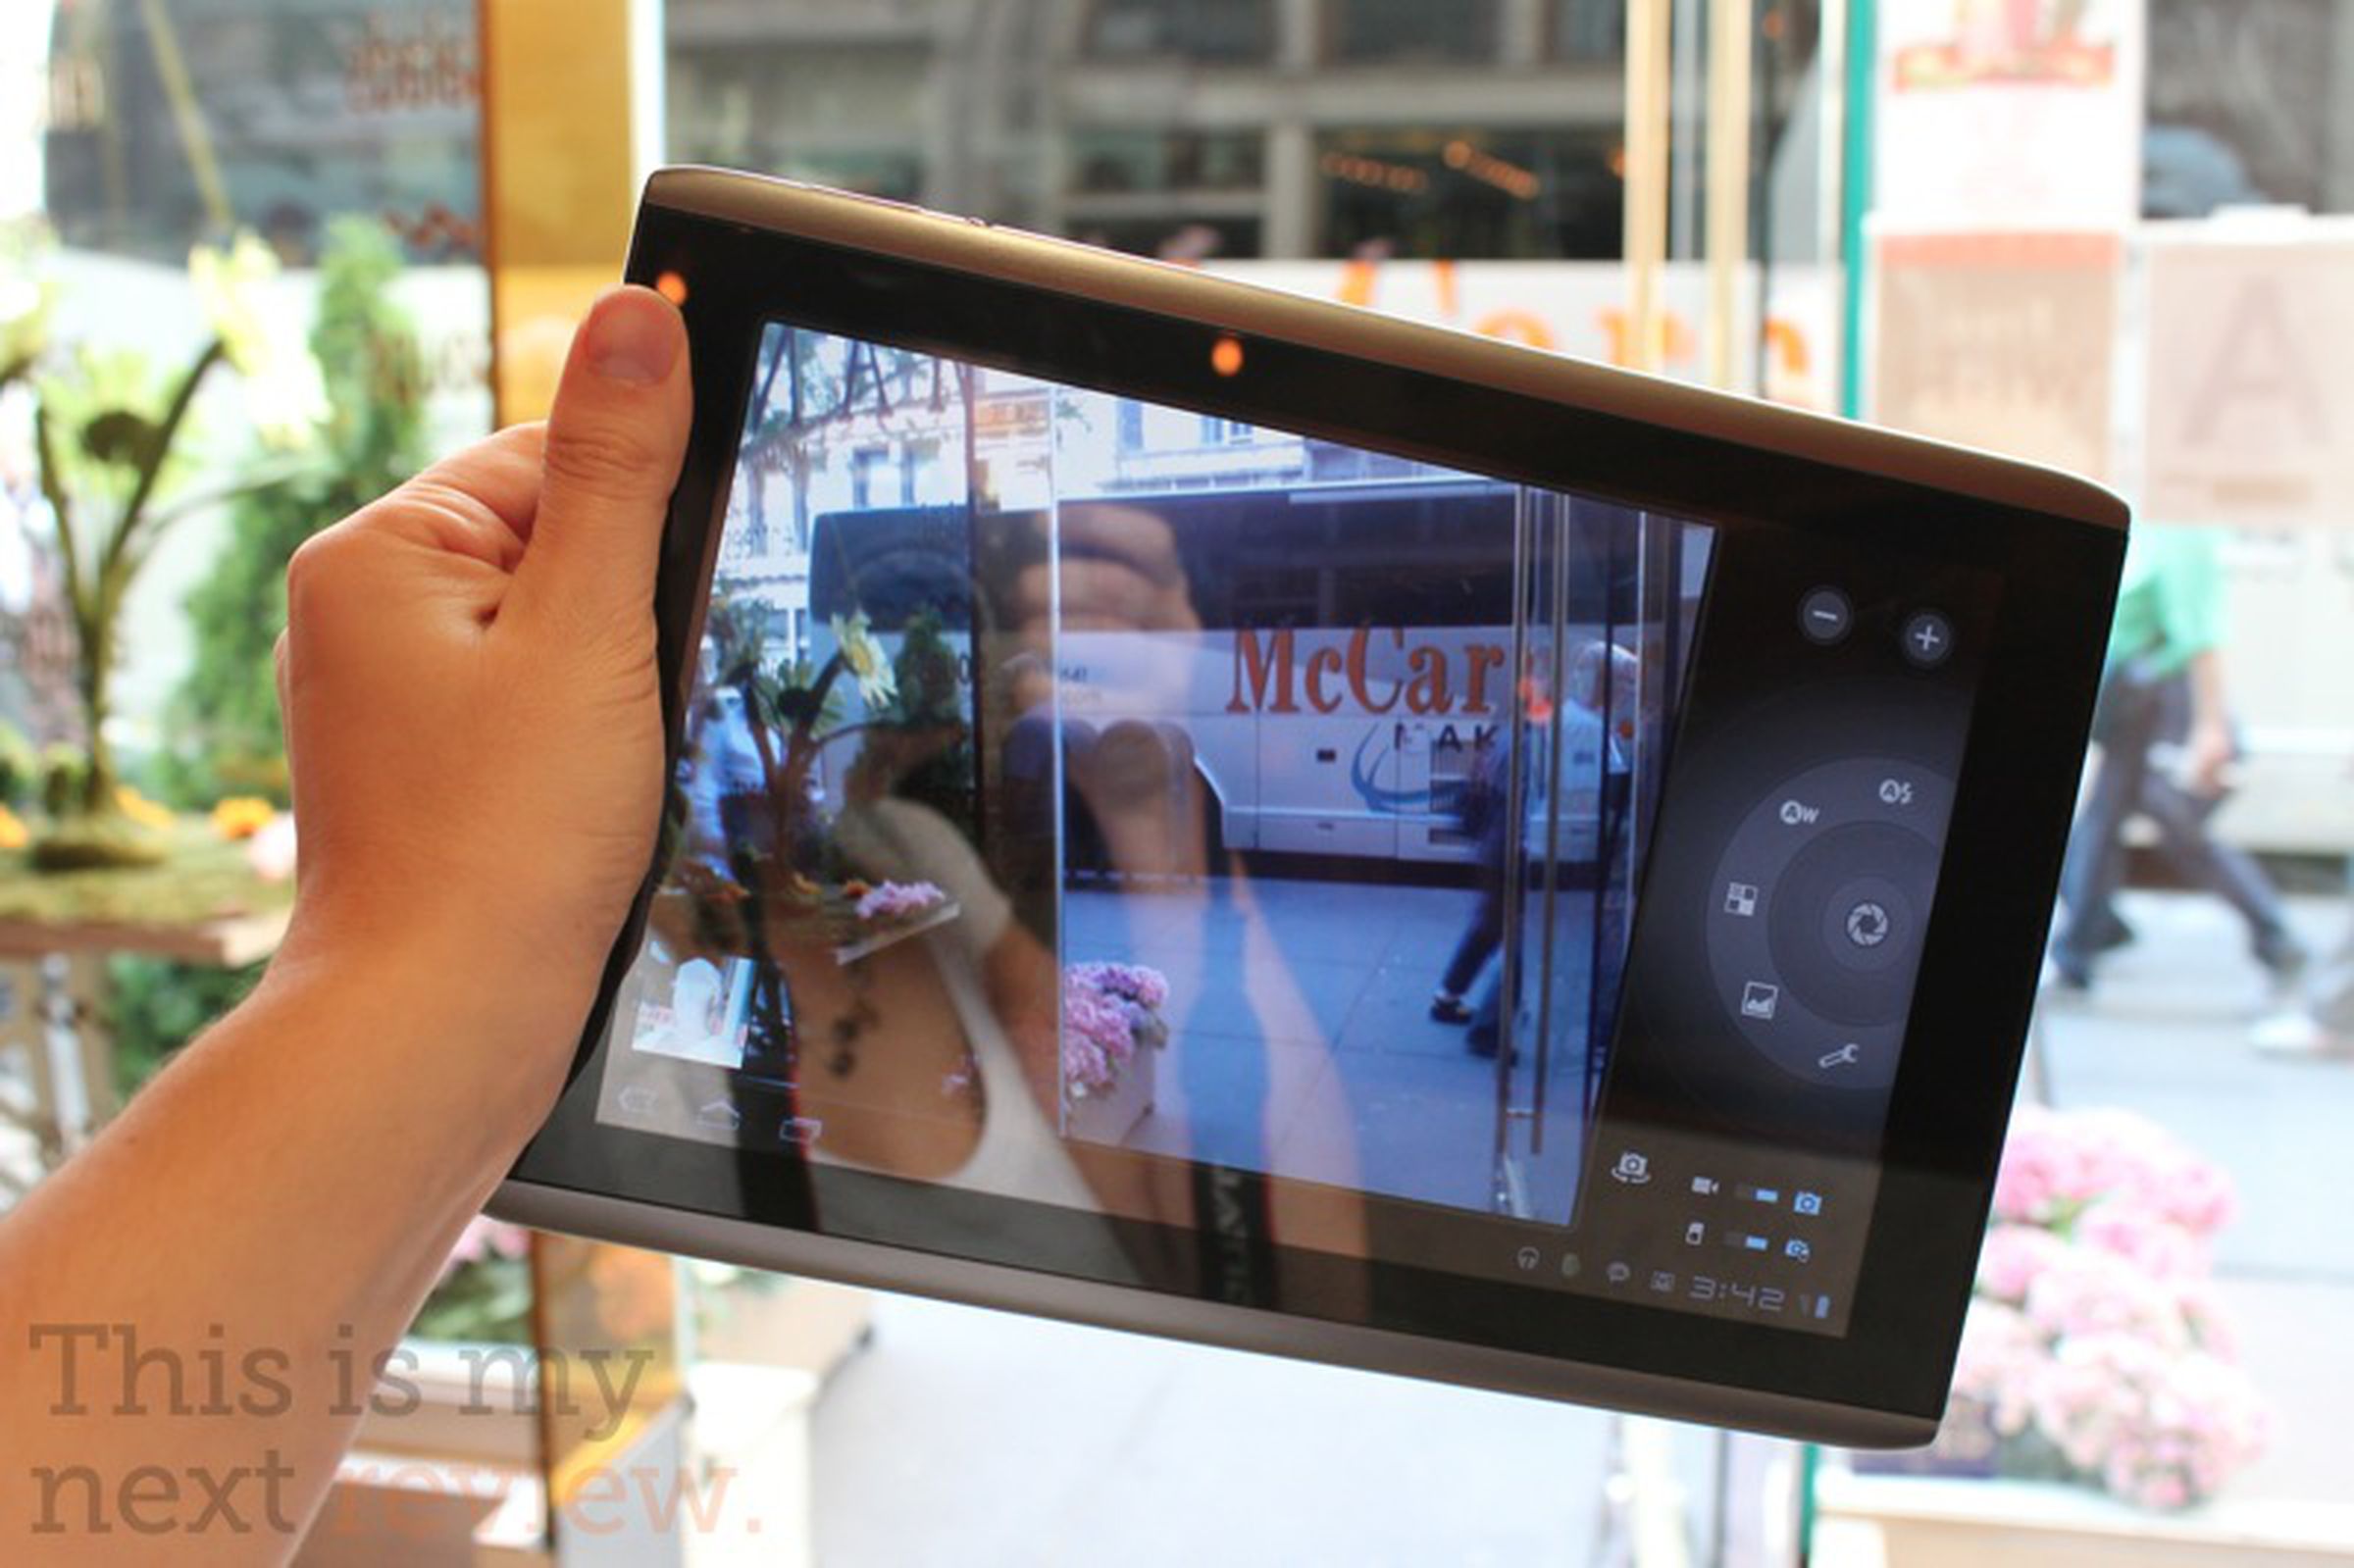 Acer Iconia Tab A500 review pictures